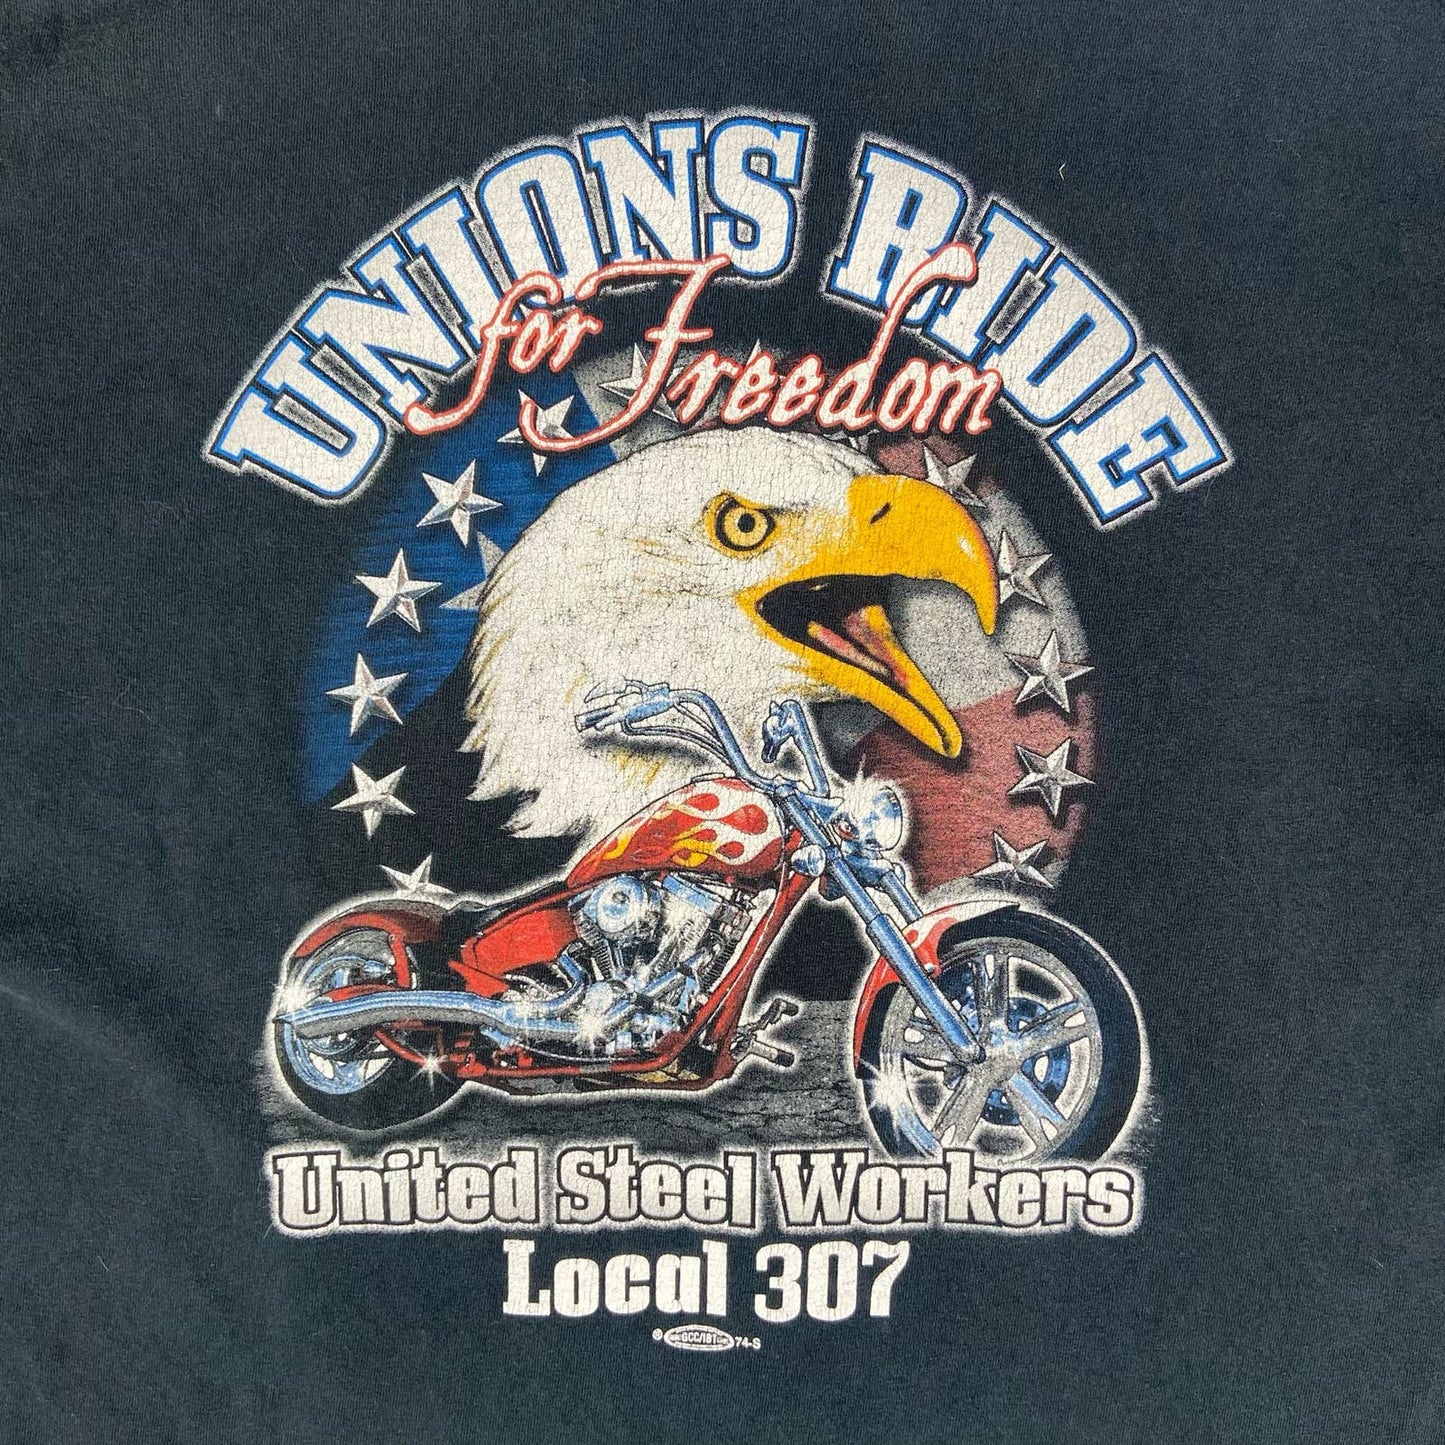 (2XL) Motorcycle Union Ride for Freedom United Steel Workers Pocket T-Shirt